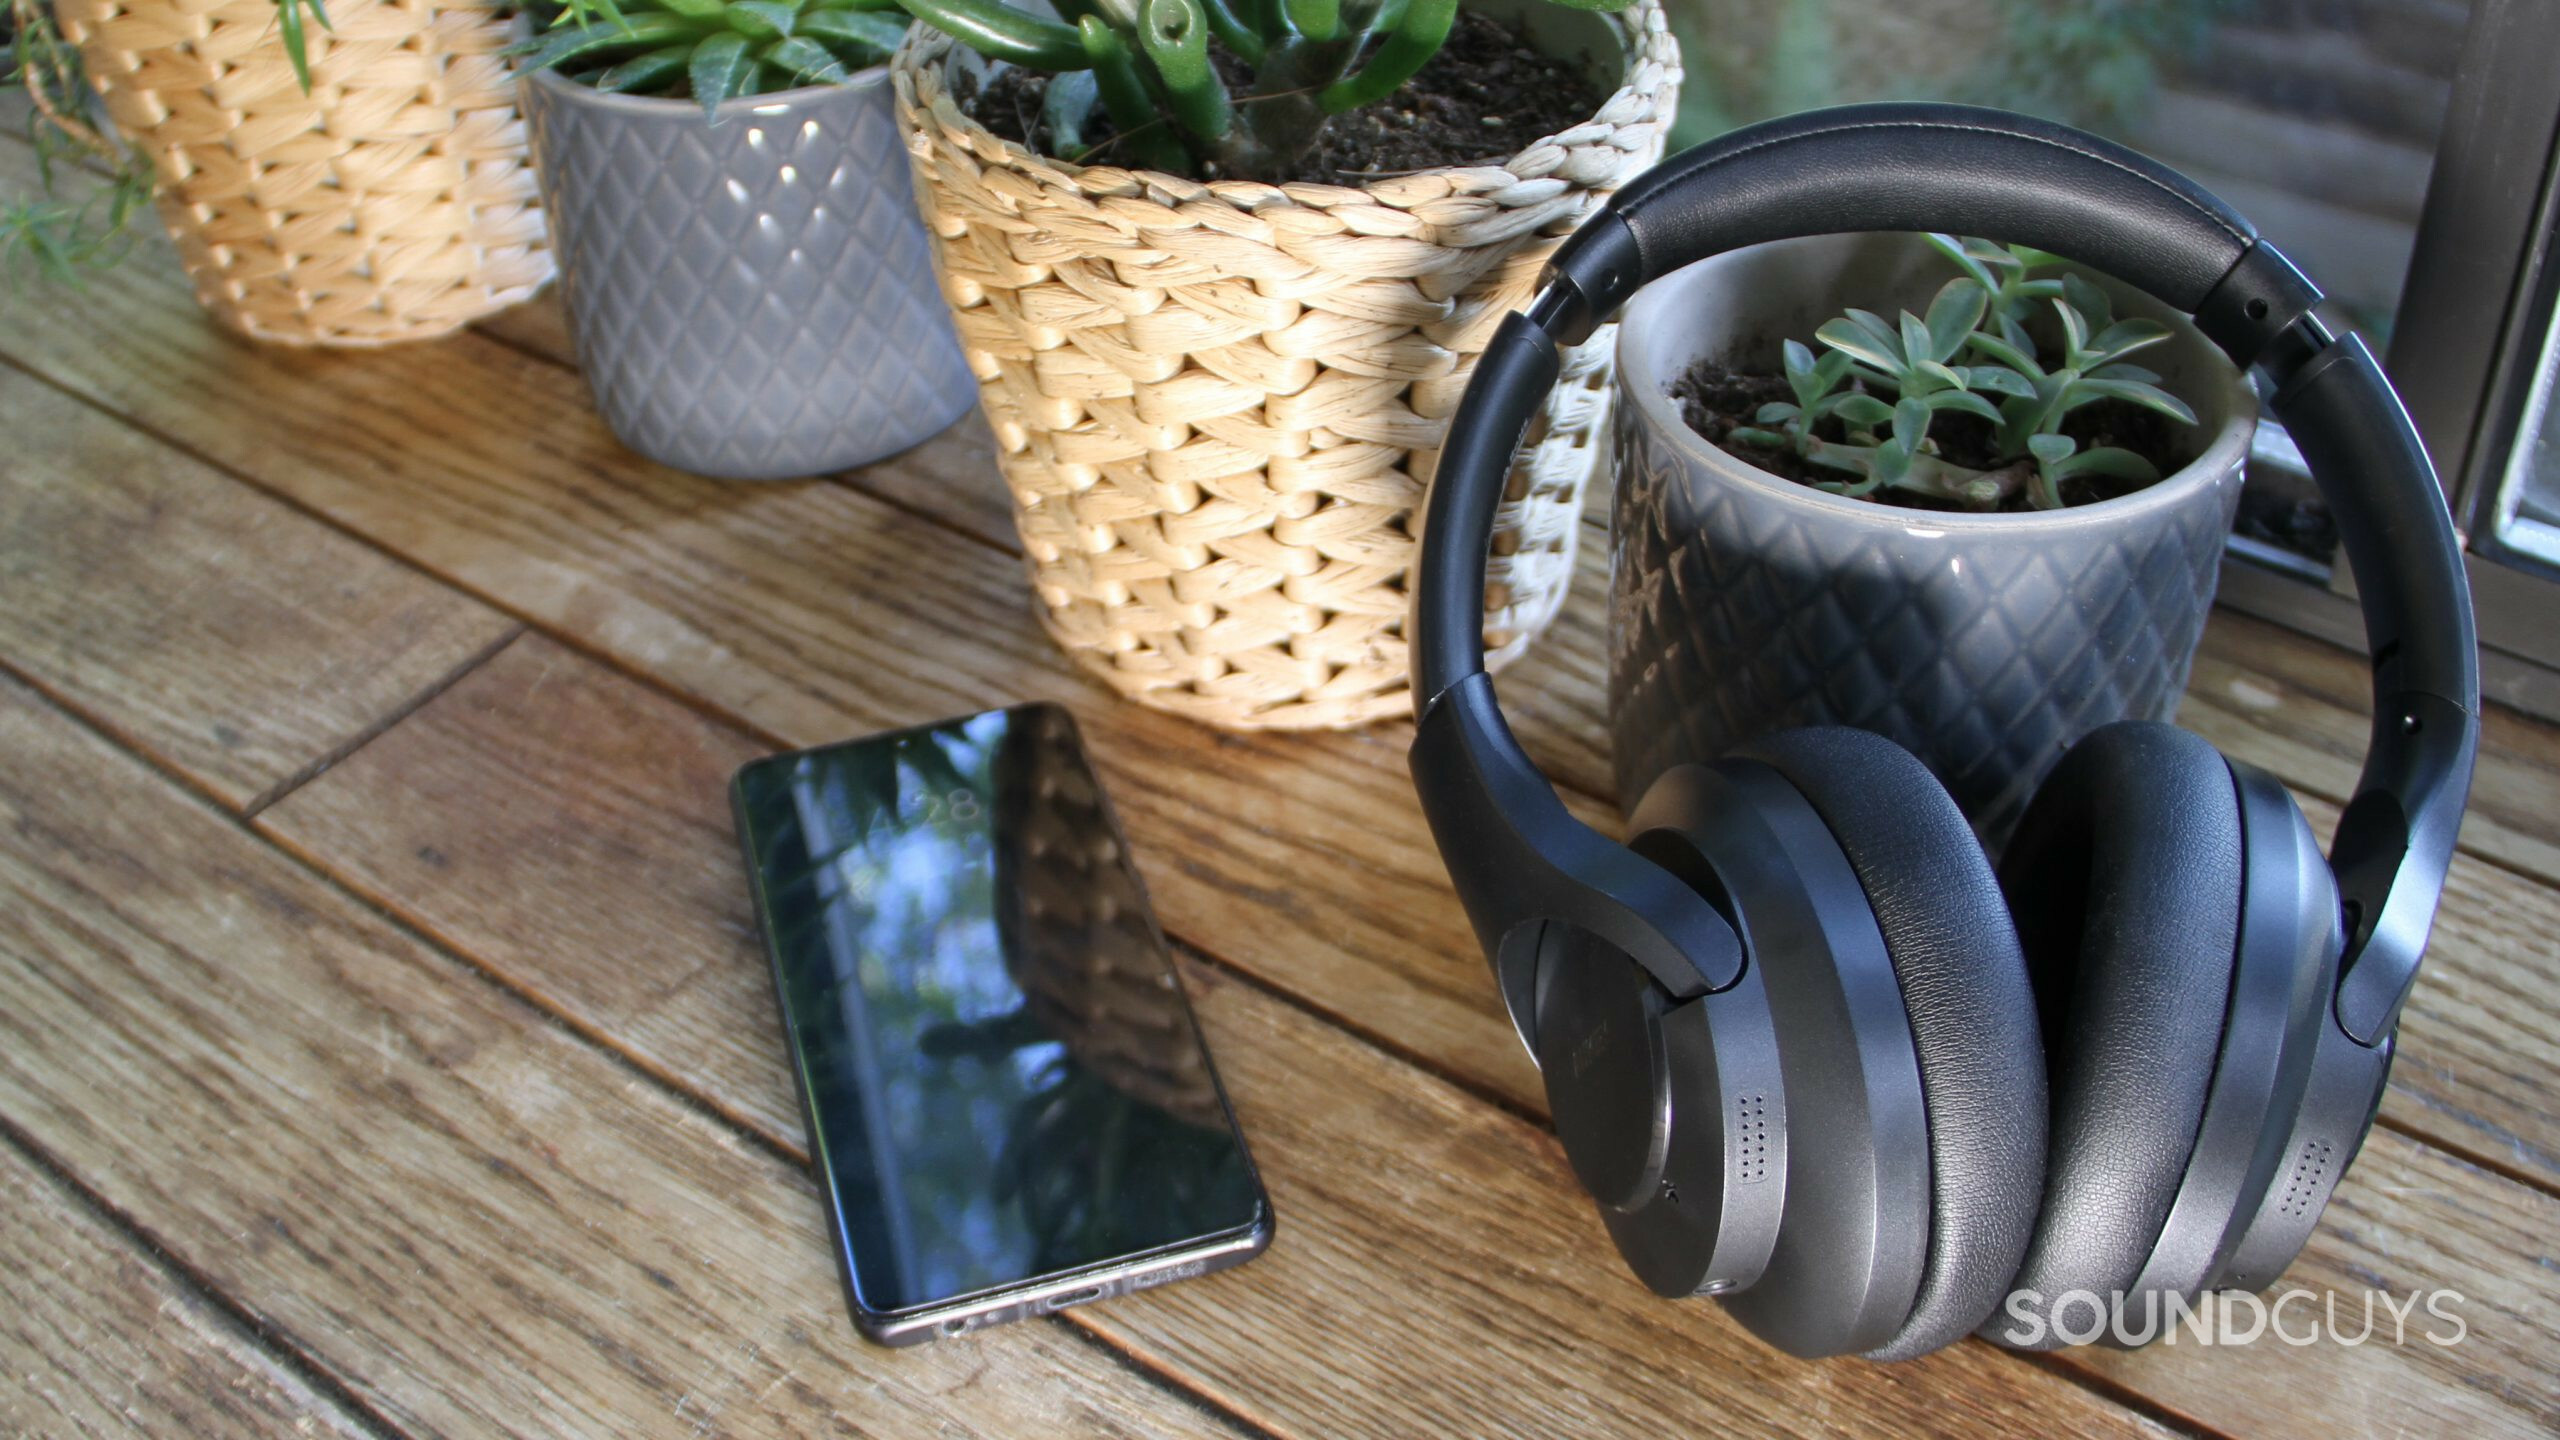 Leaning against a ceramic pot is the Aukey Hybrid Active Noise Canceling Headphones with a Huawei phone and a window in the background.